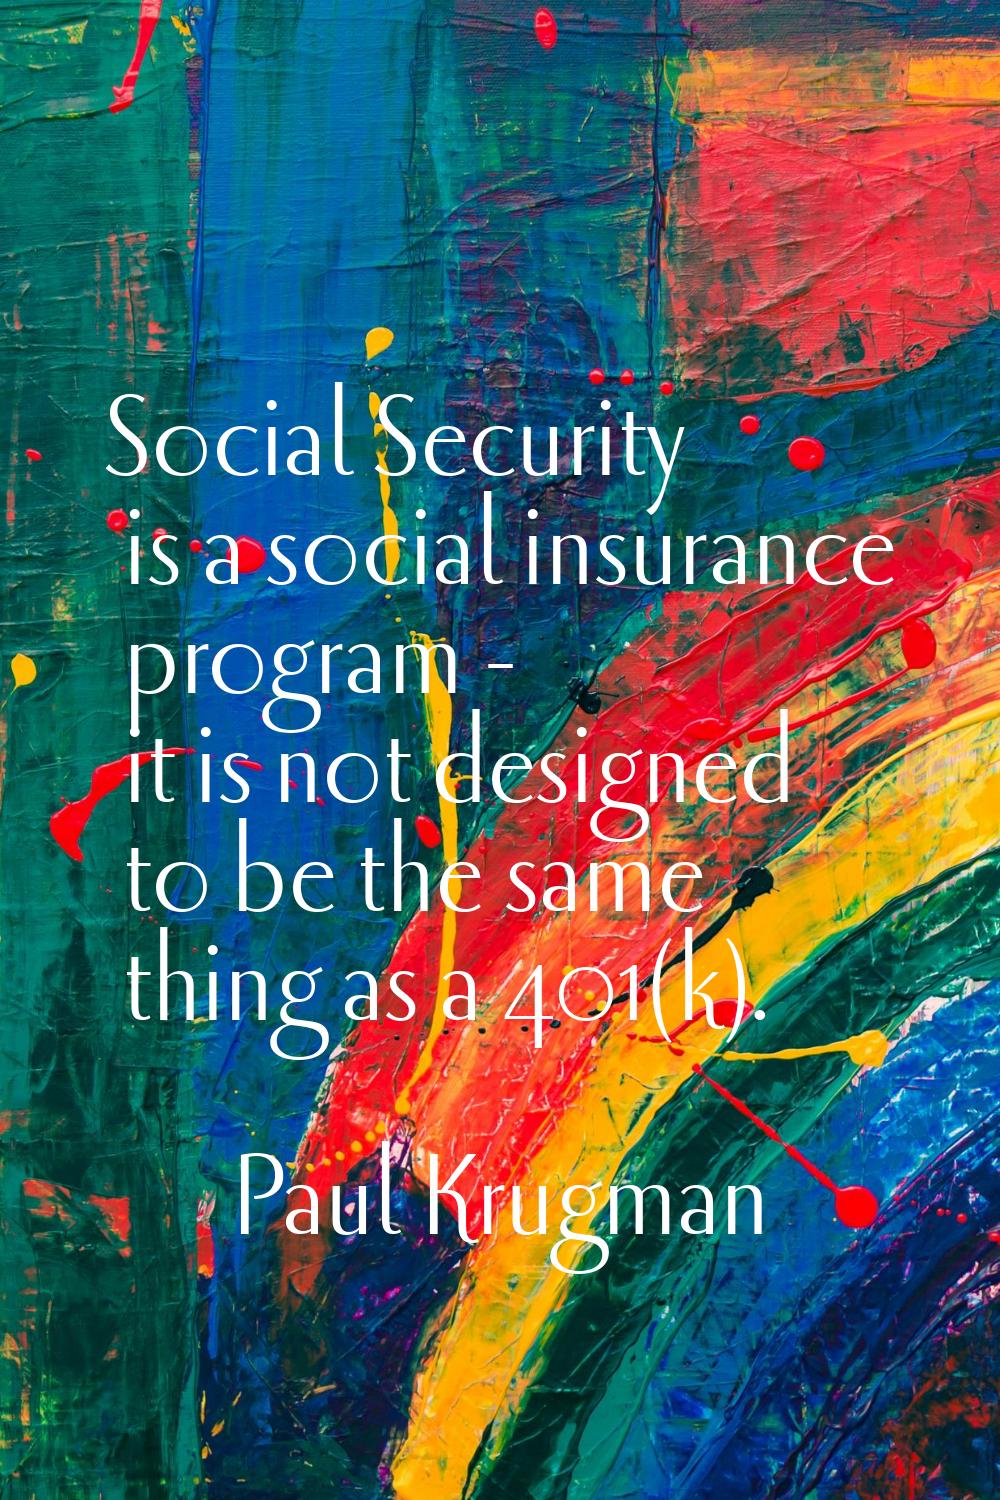 Social Security is a social insurance program - it is not designed to be the same thing as a 401(k)